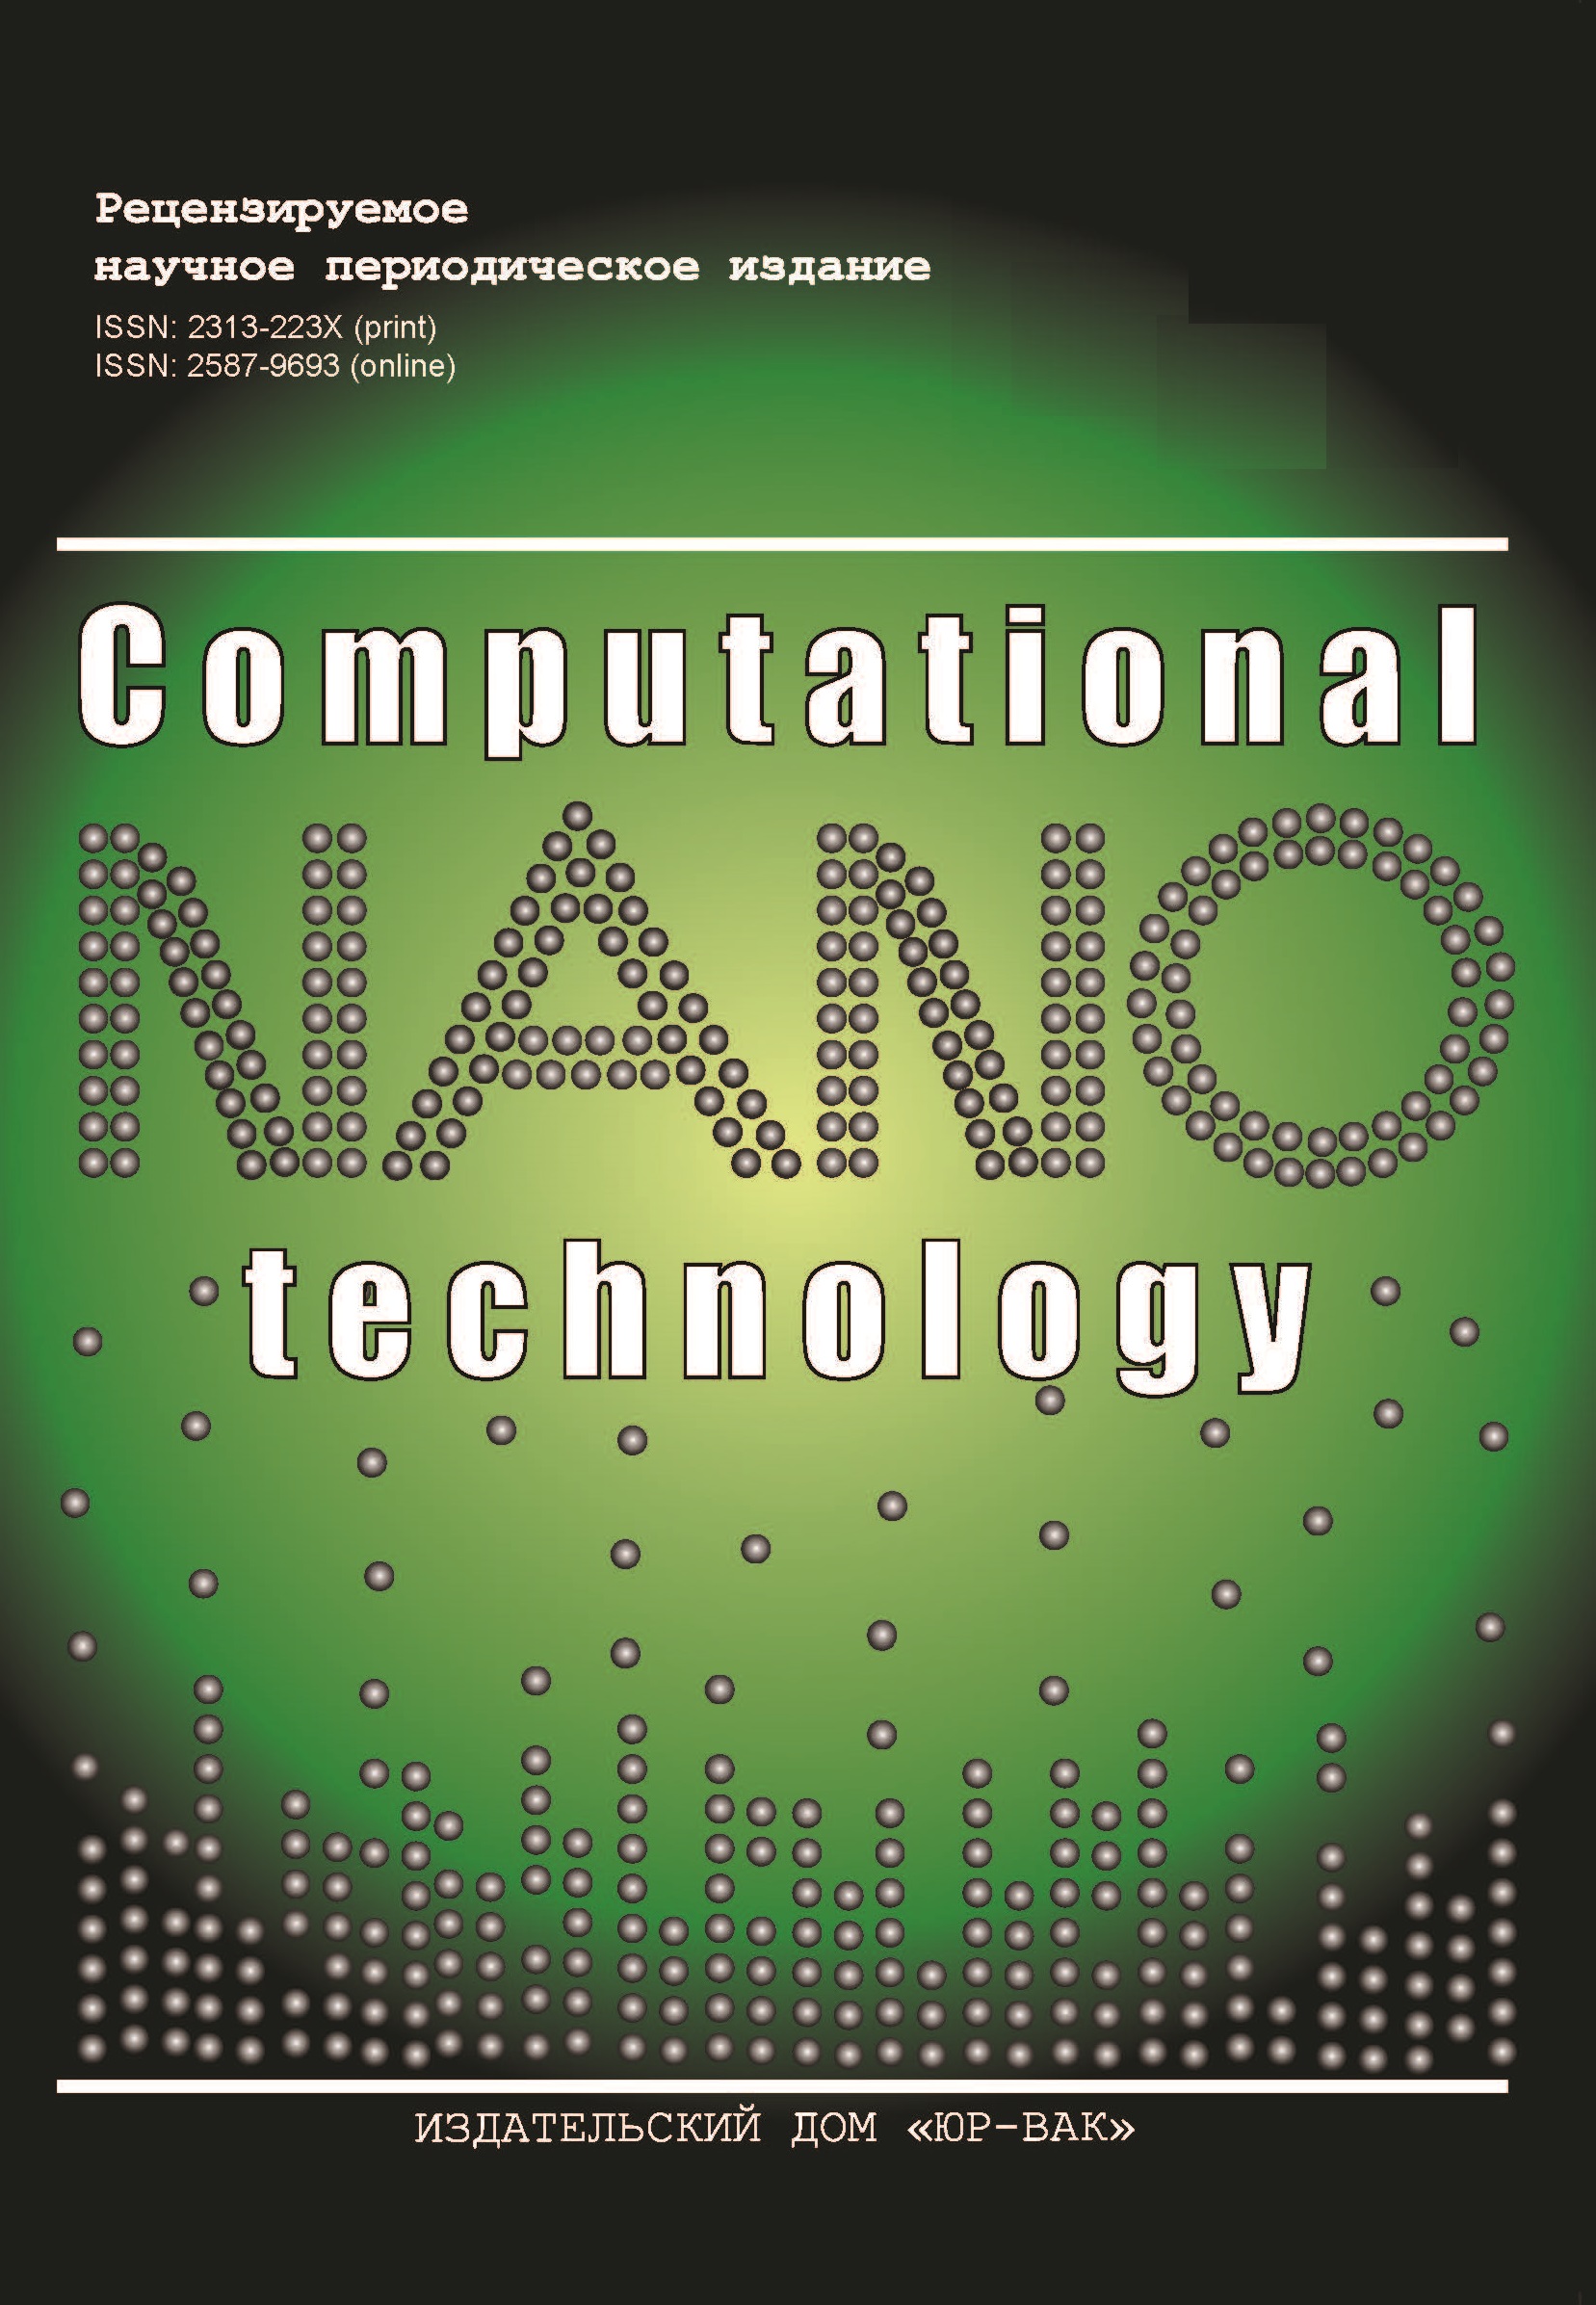 nanotechnology in computers